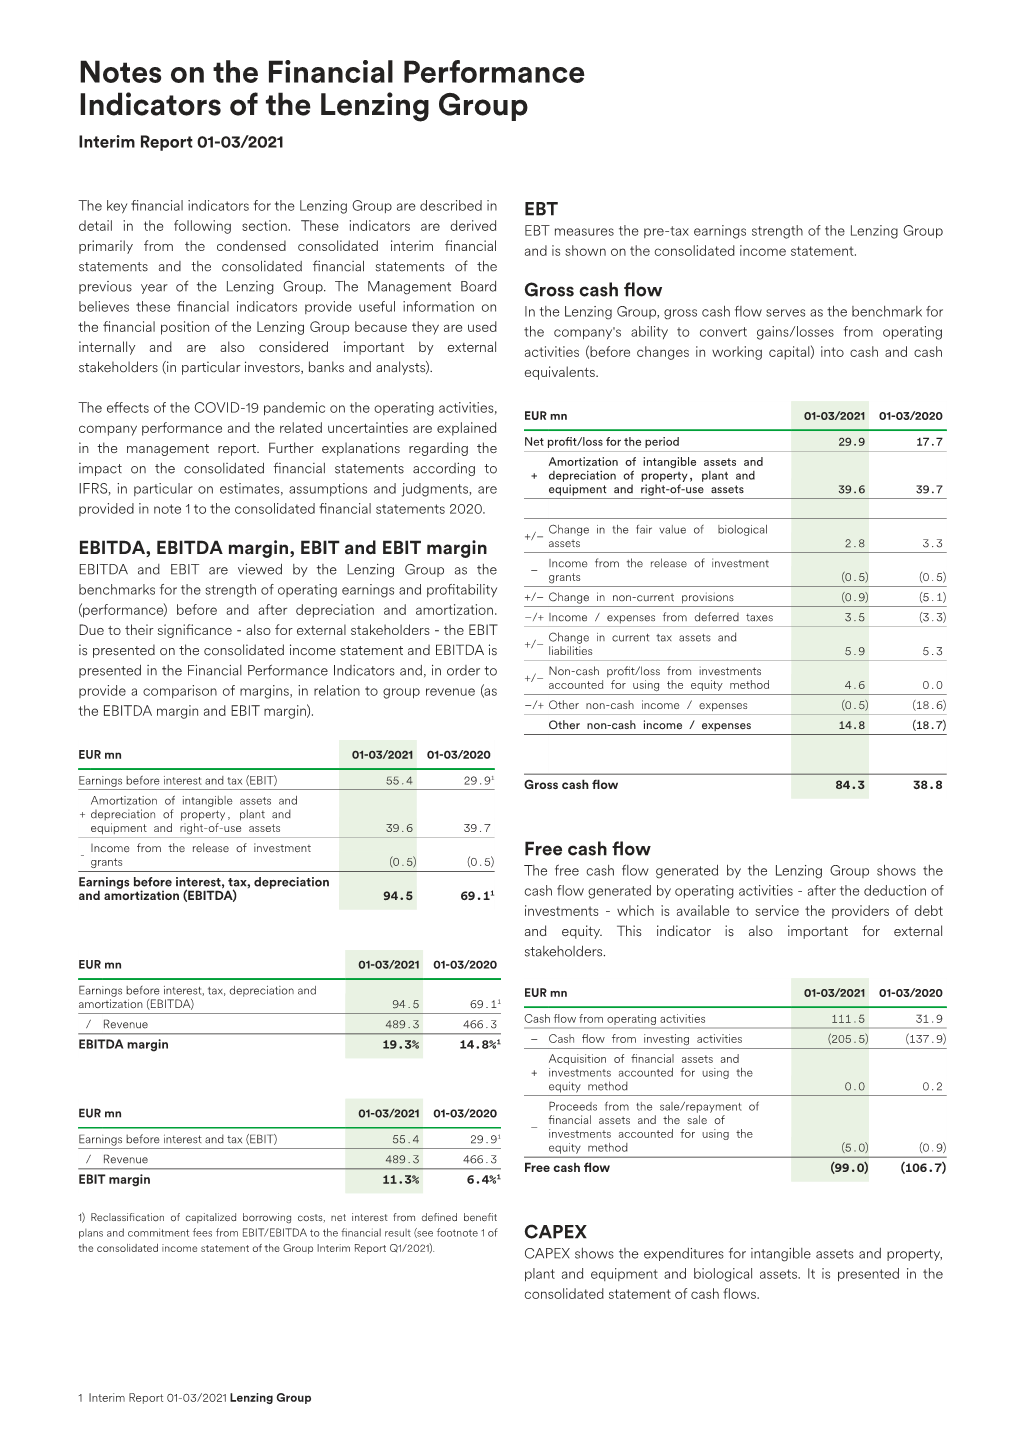 Notes on the Financial Performance Indicators of the Lenzing Group Interim Report 01-03/2021